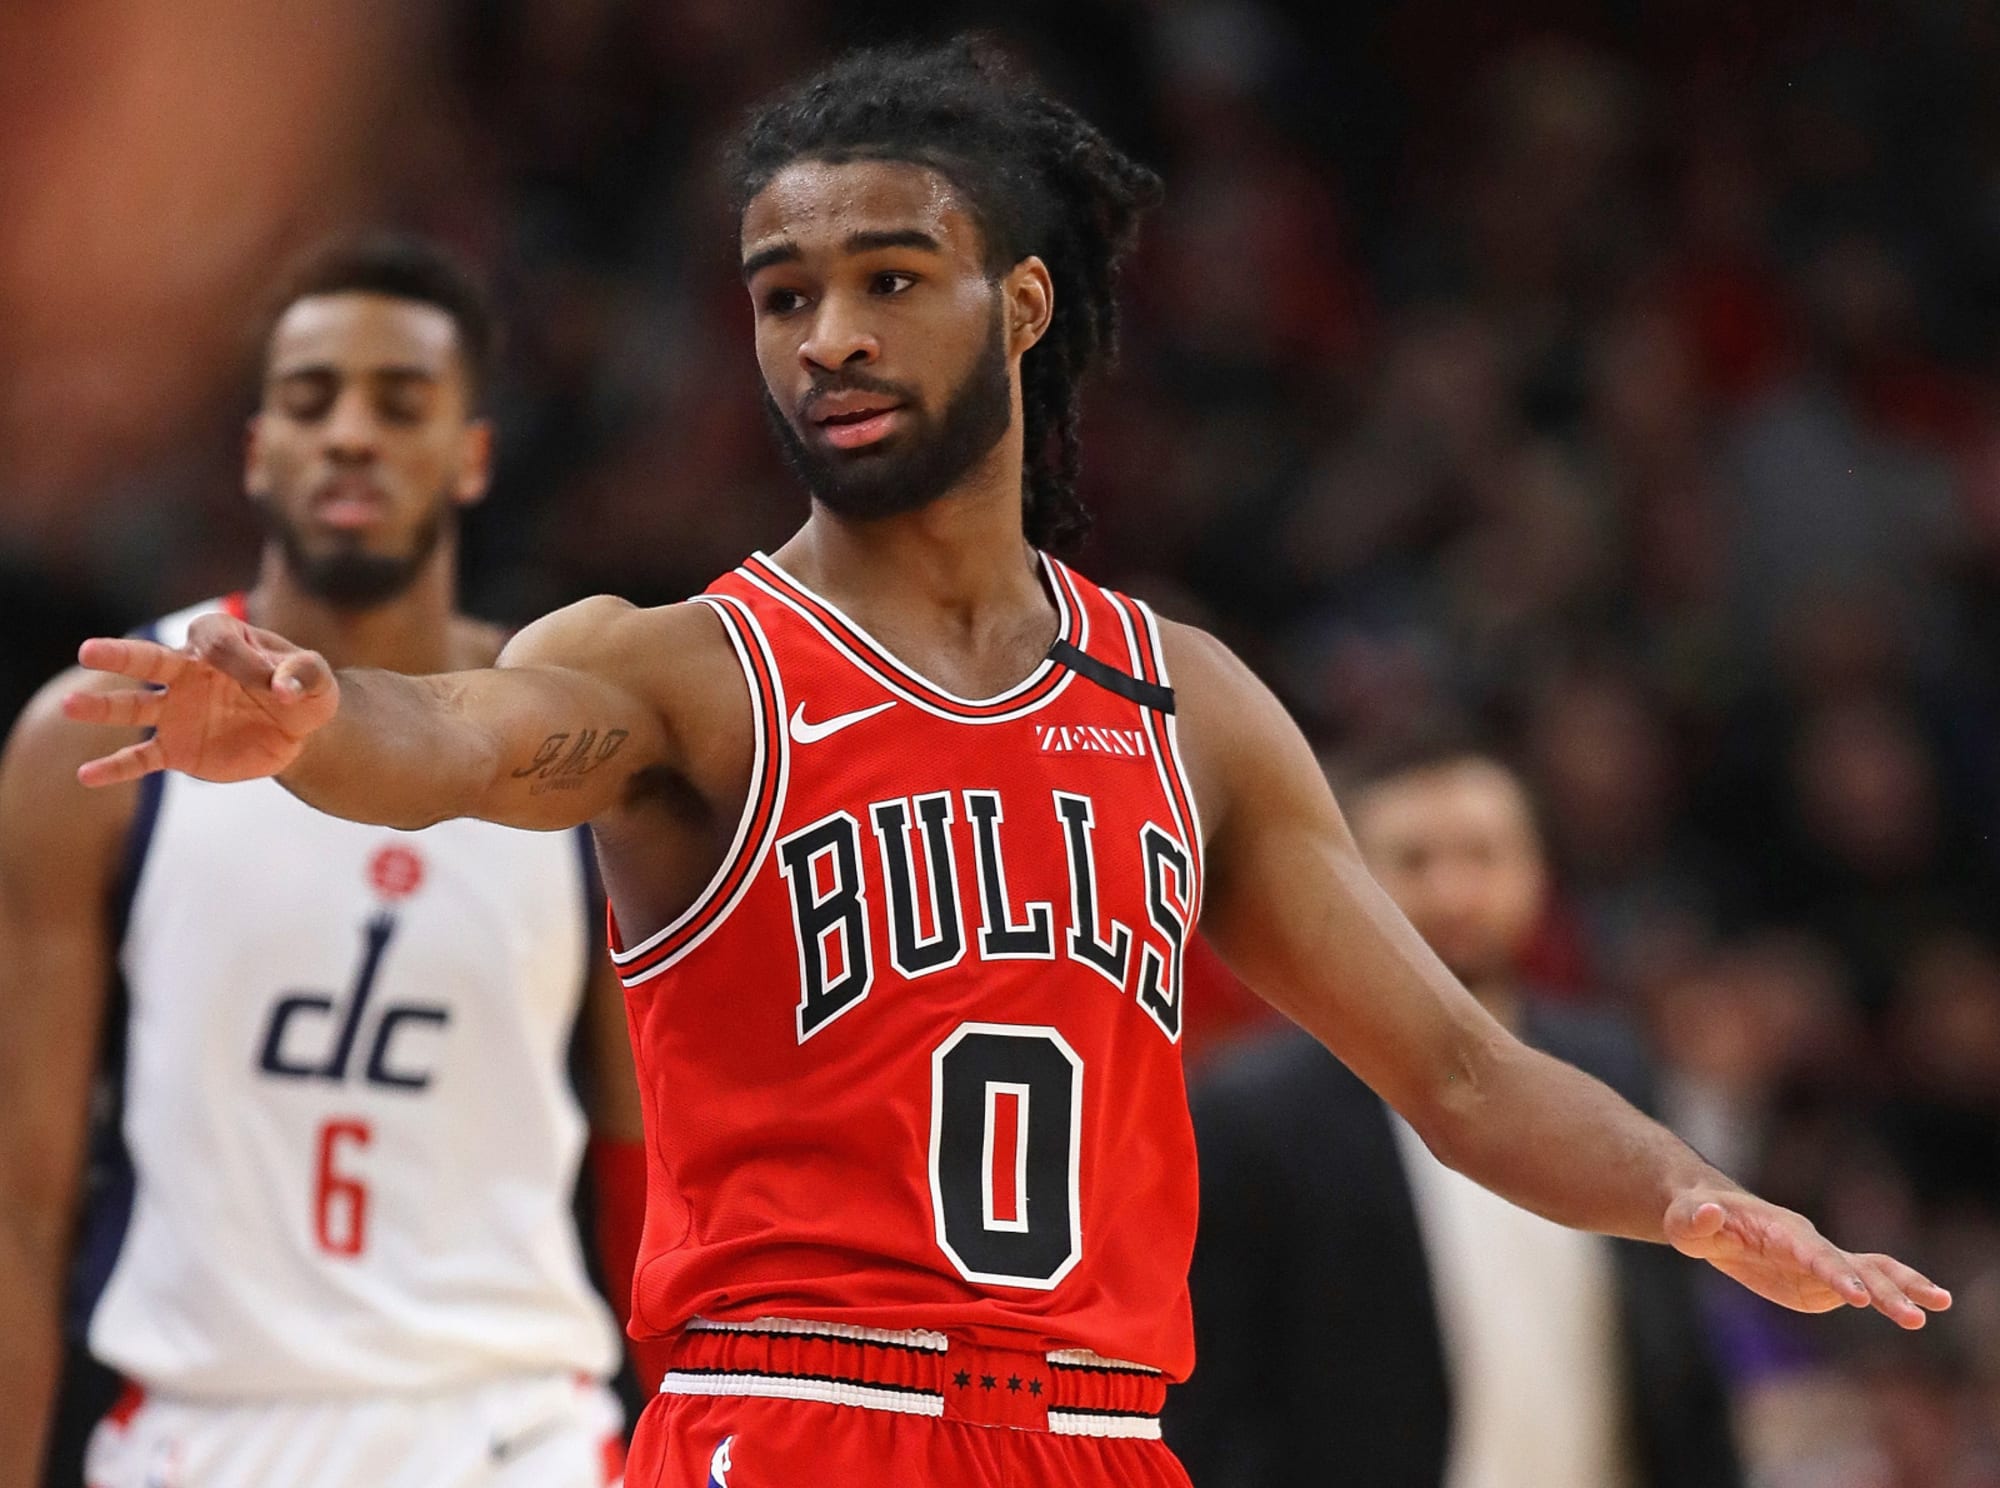 UNC Basketball: Chicago Bulls rookie Coby White scores game-high 26